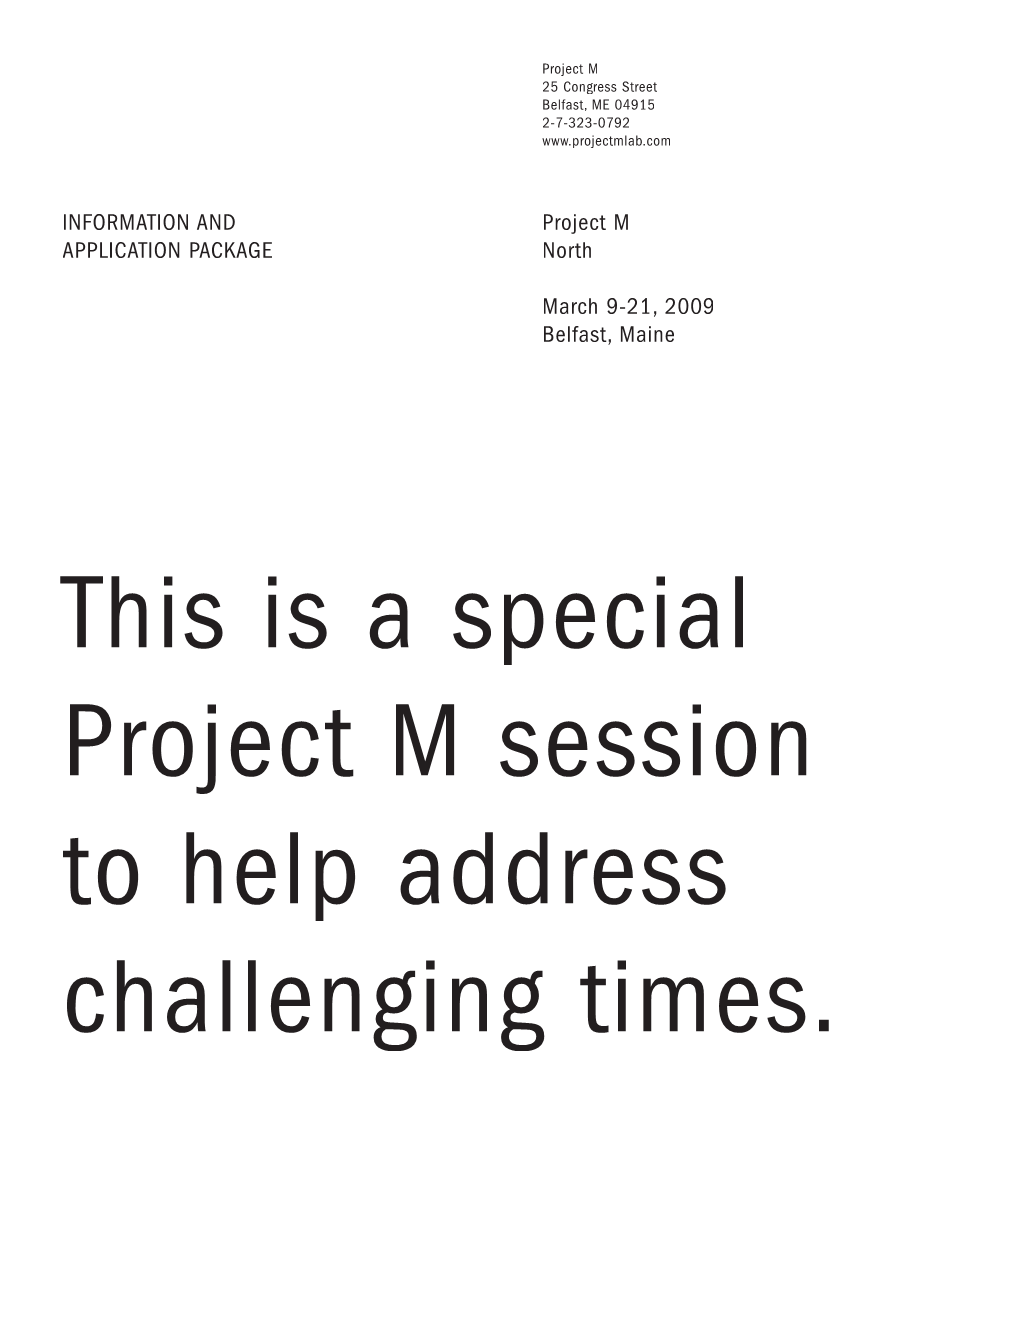 This Is a Special Project M Session to Help Address Challenging Times. Page 2